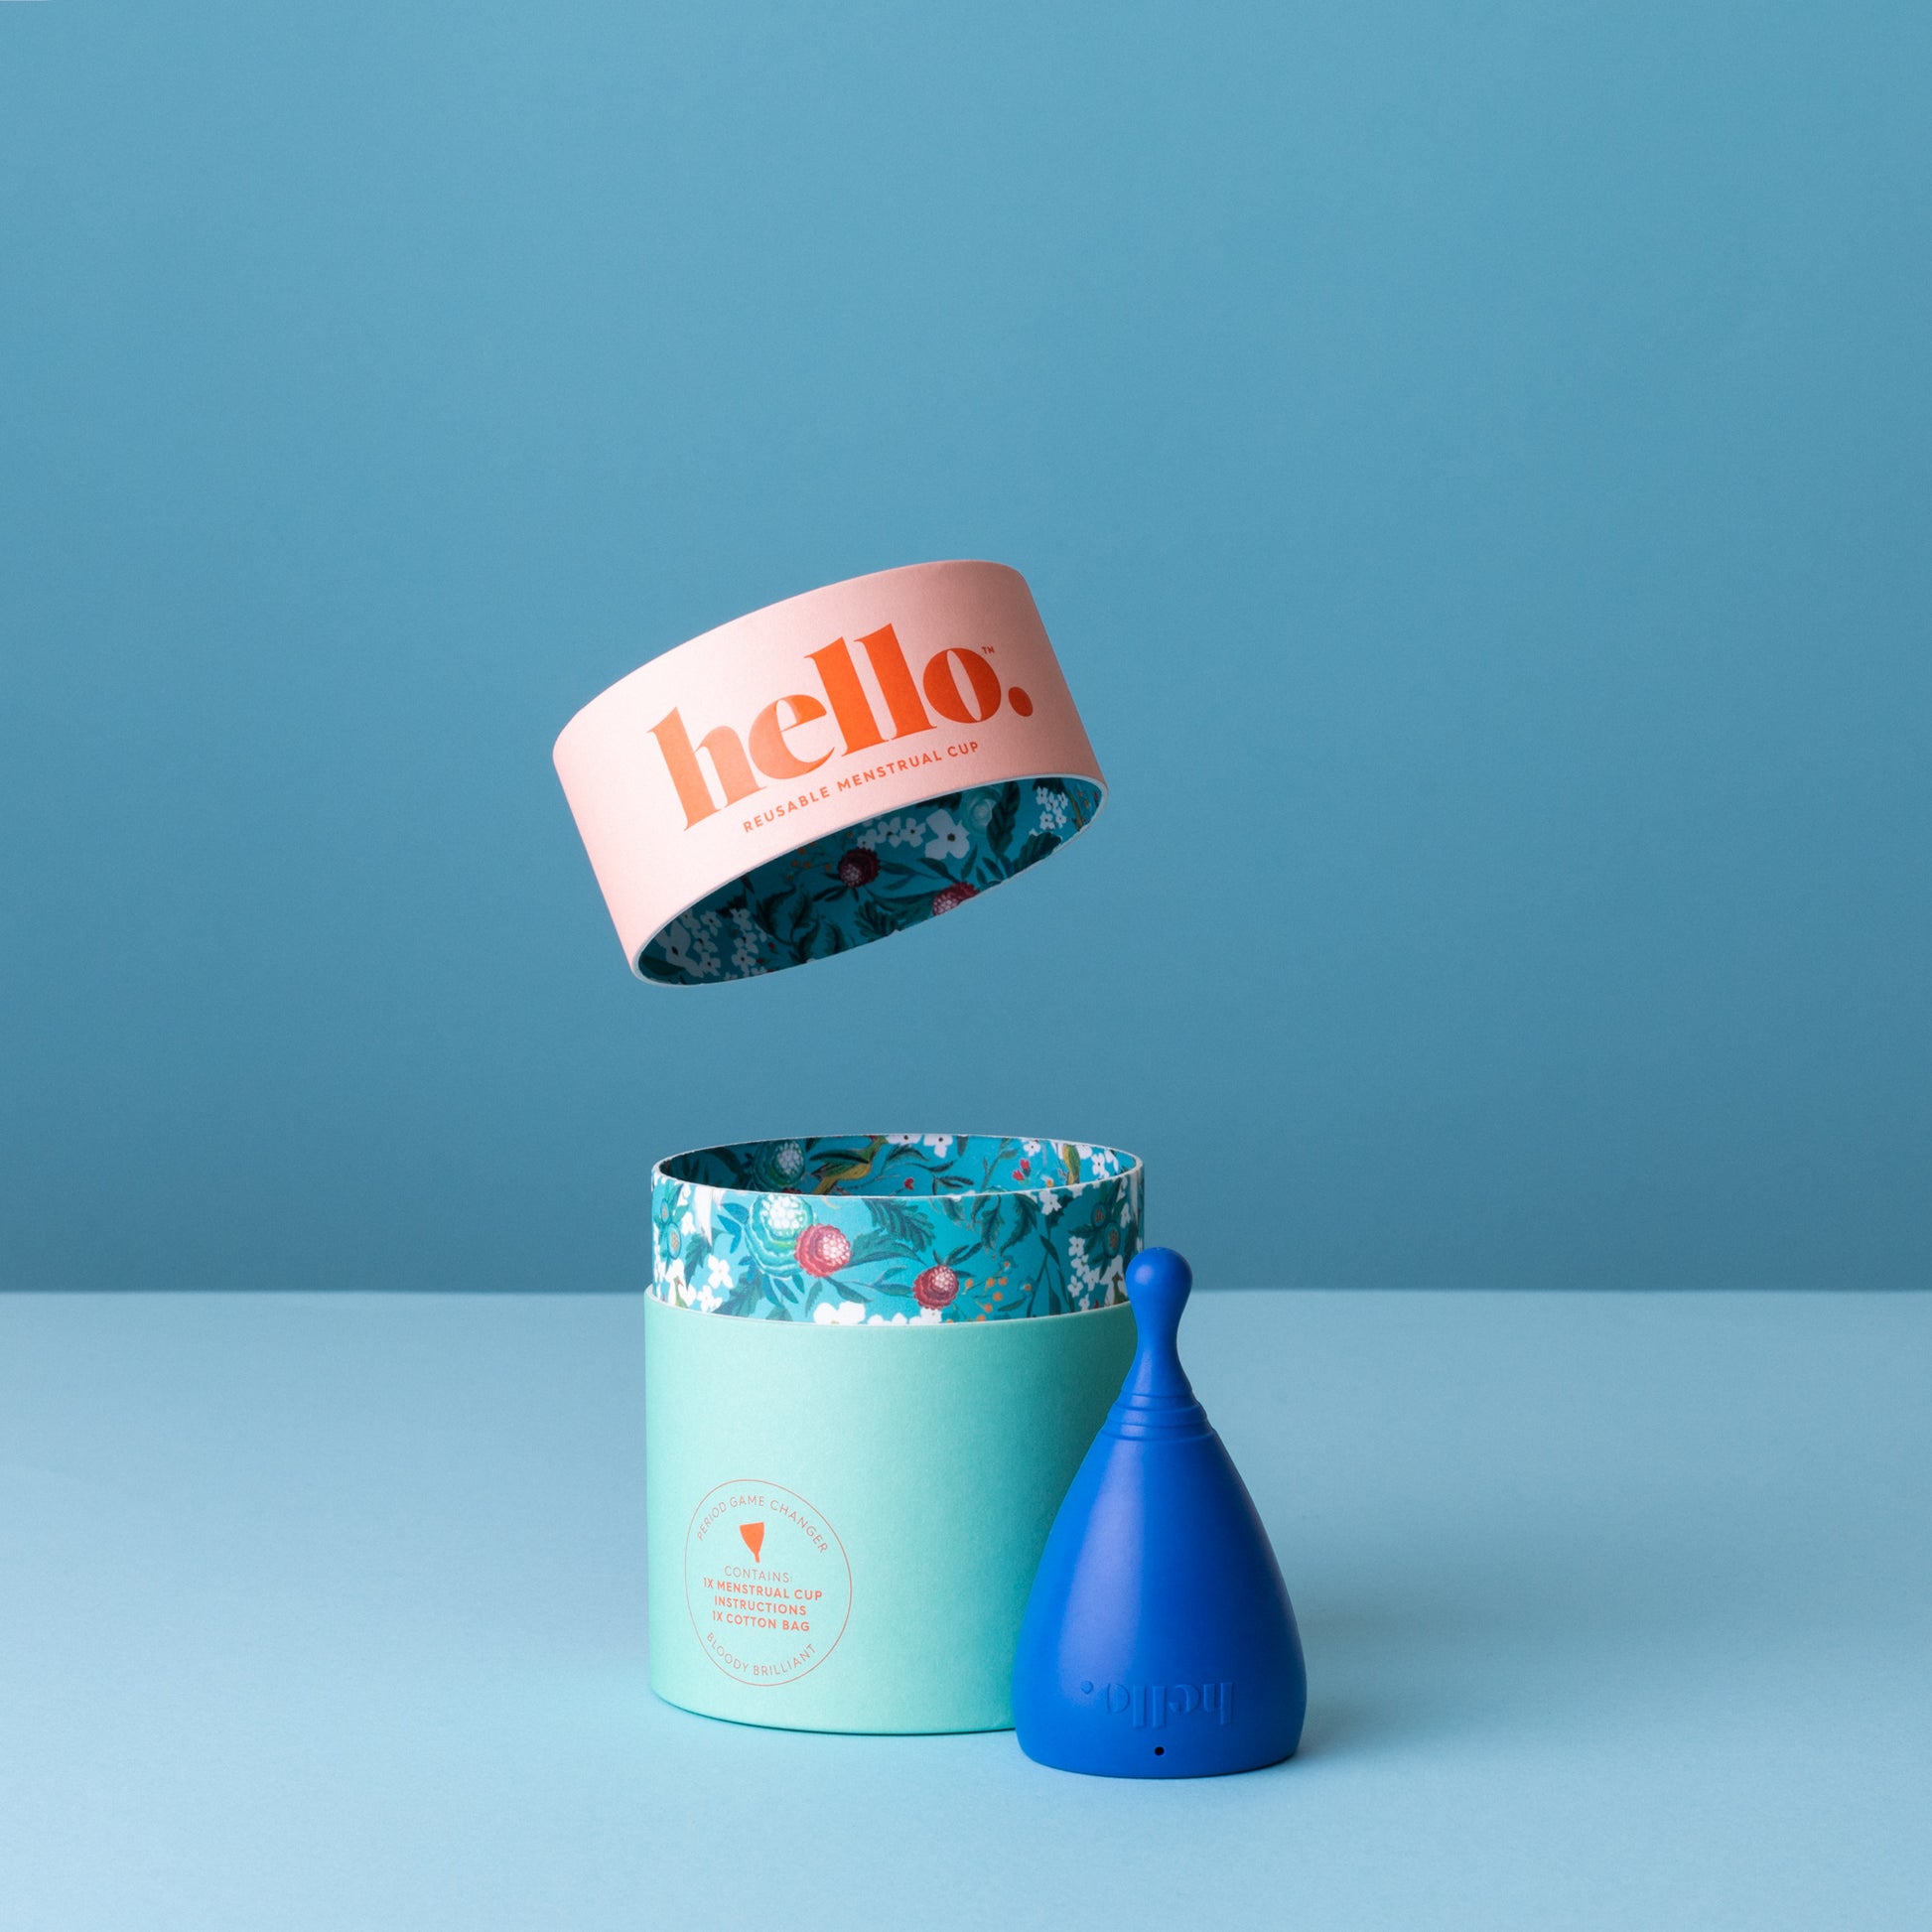 L Hello Cup High Cervix with papertube box on blue background